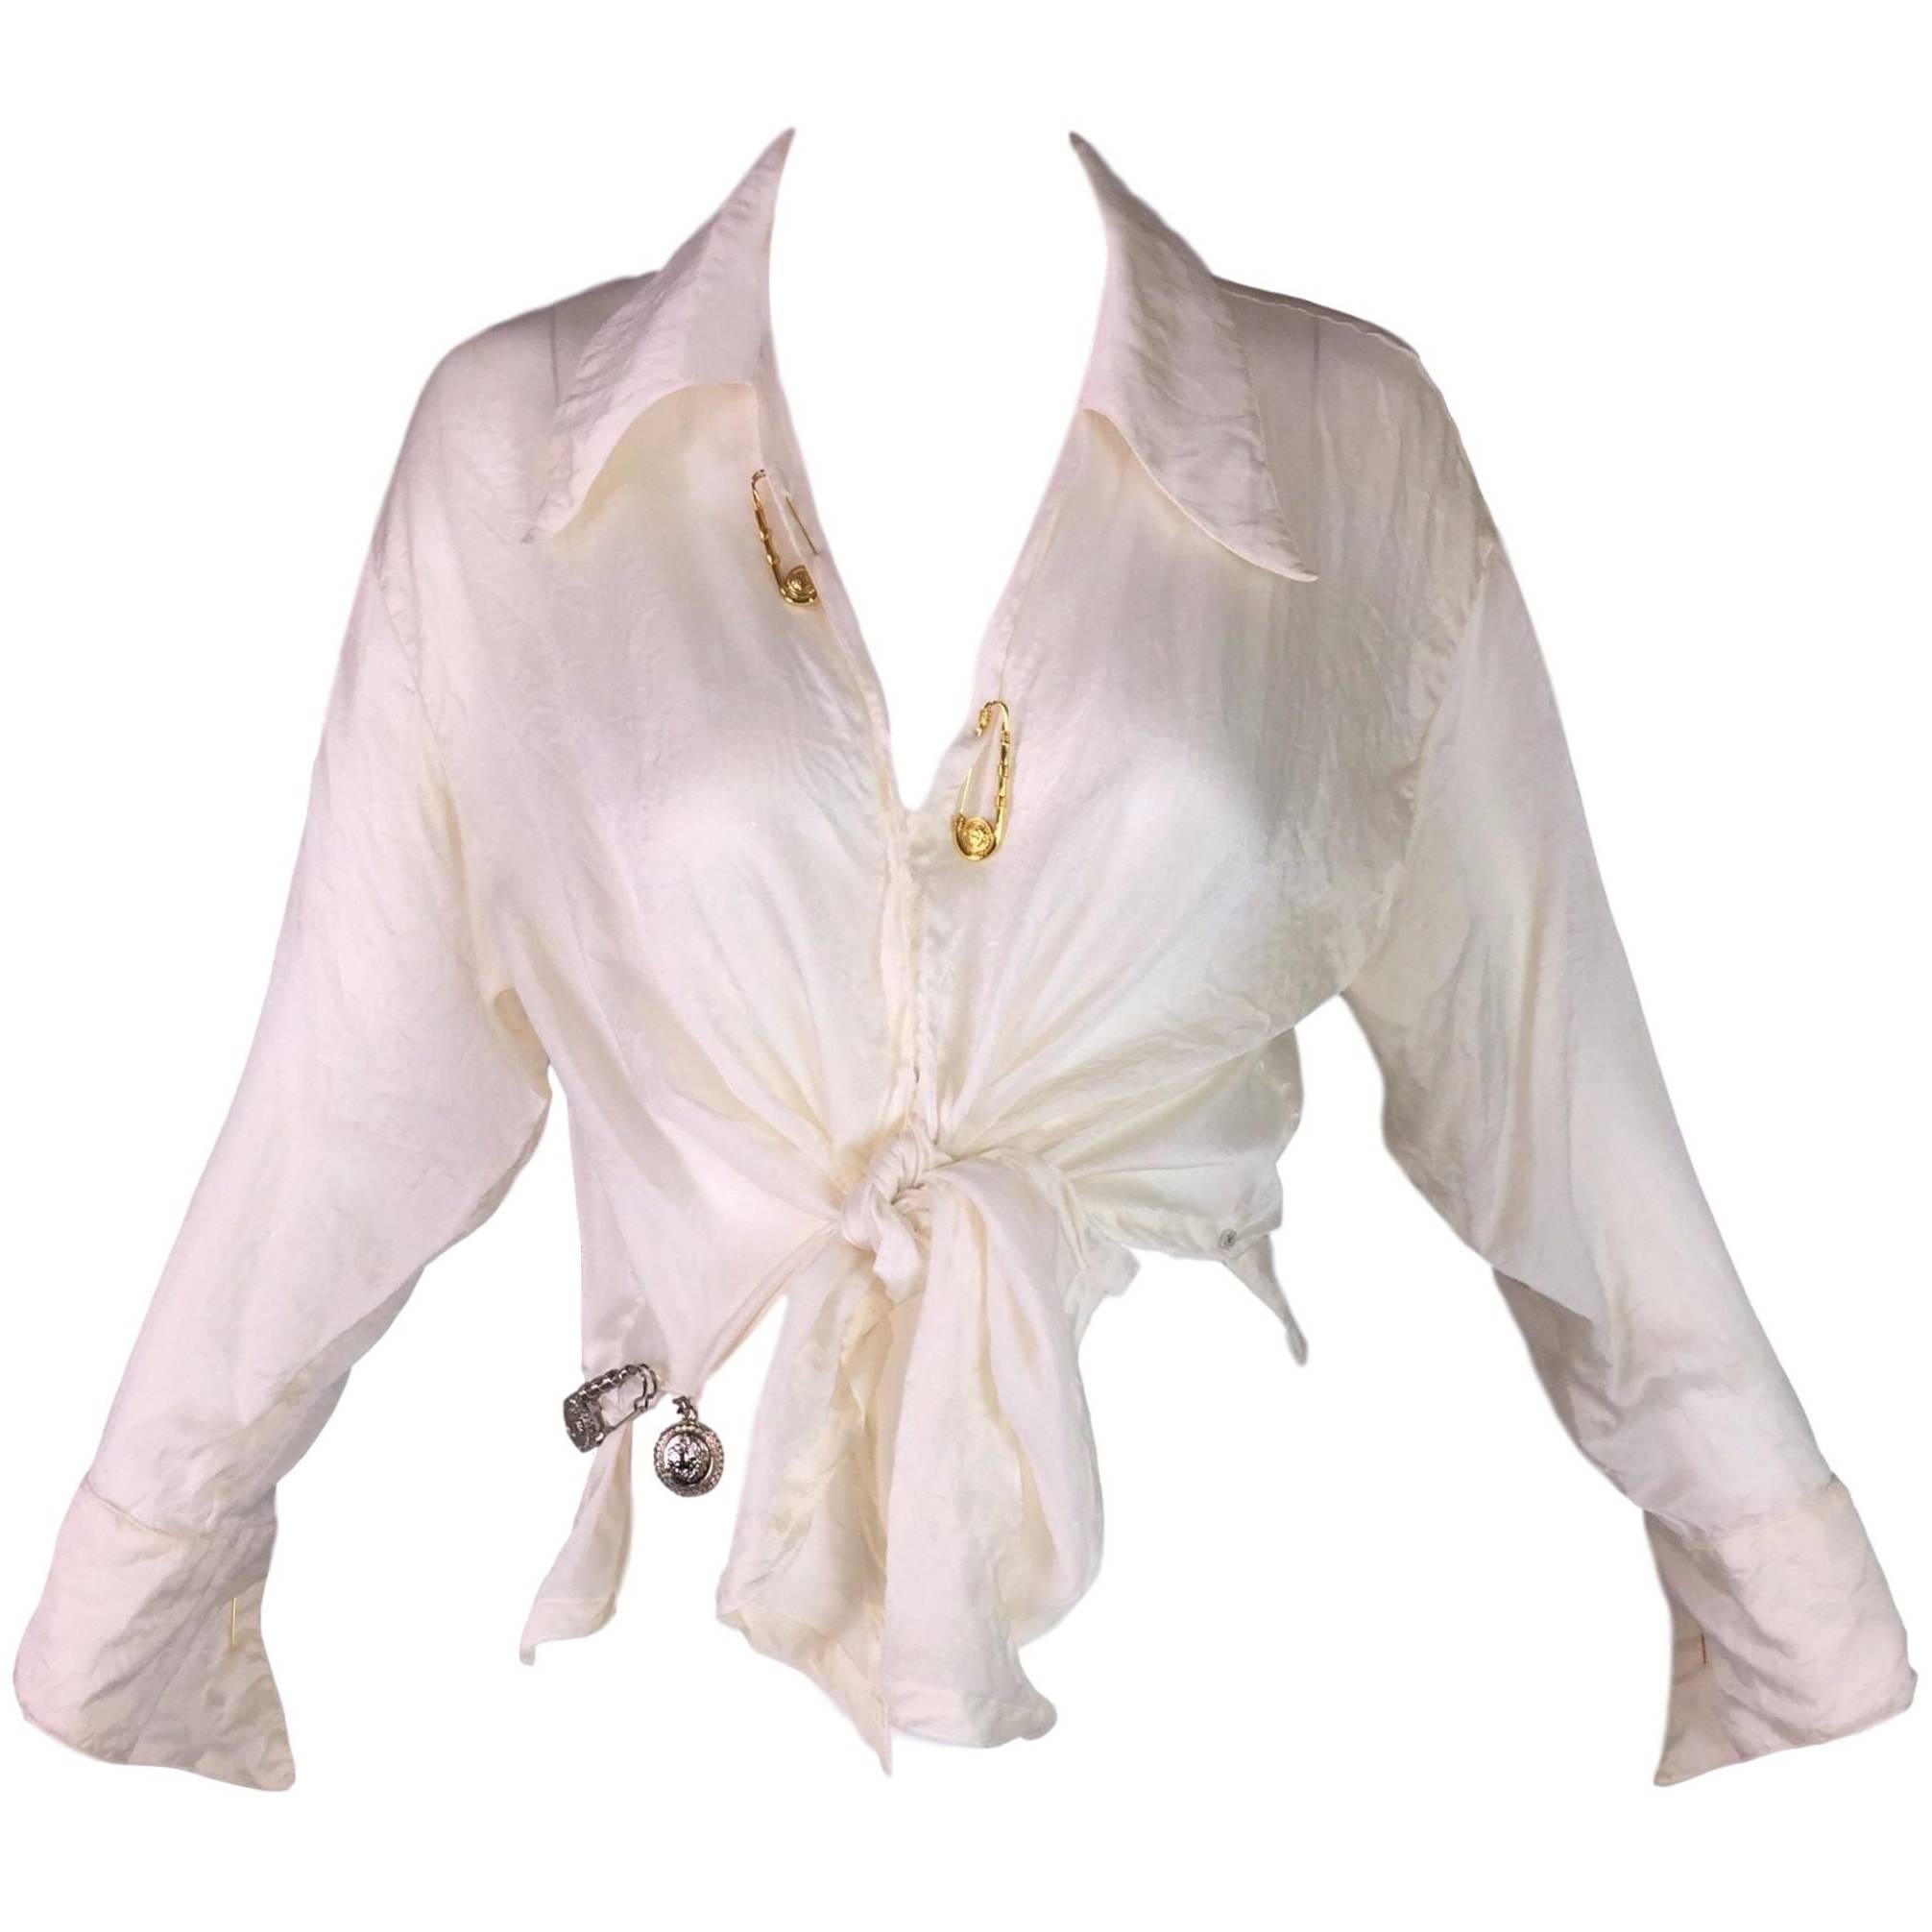 S/S 1994 Gianni Versace Sheer Ivory Silk Tie Front Safety Pin Blouse Top